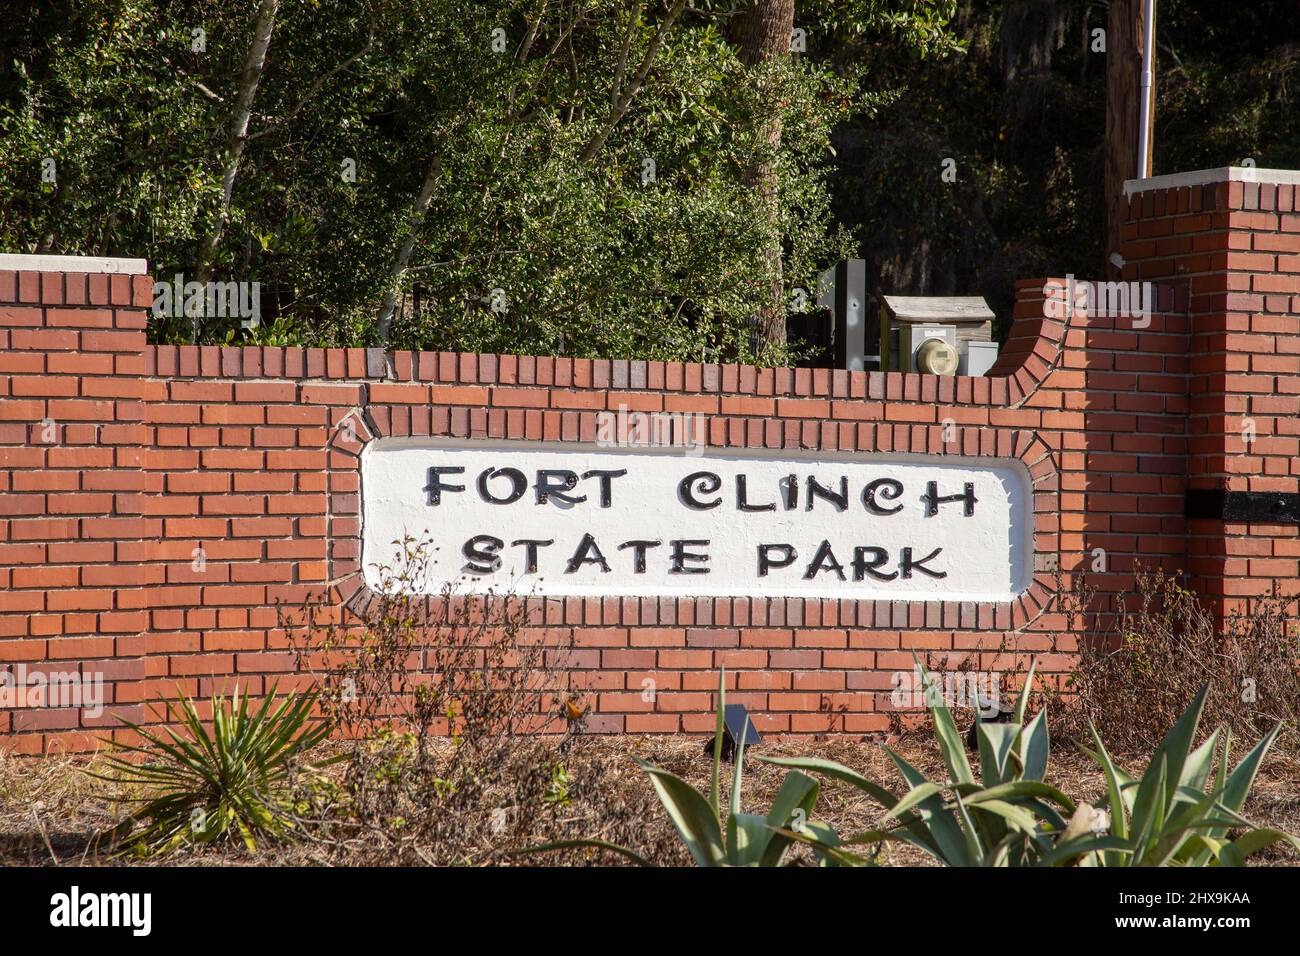 Entrance sign outside historic Fort Clinch State Park in Amelia Island, Florida. Stock Photo